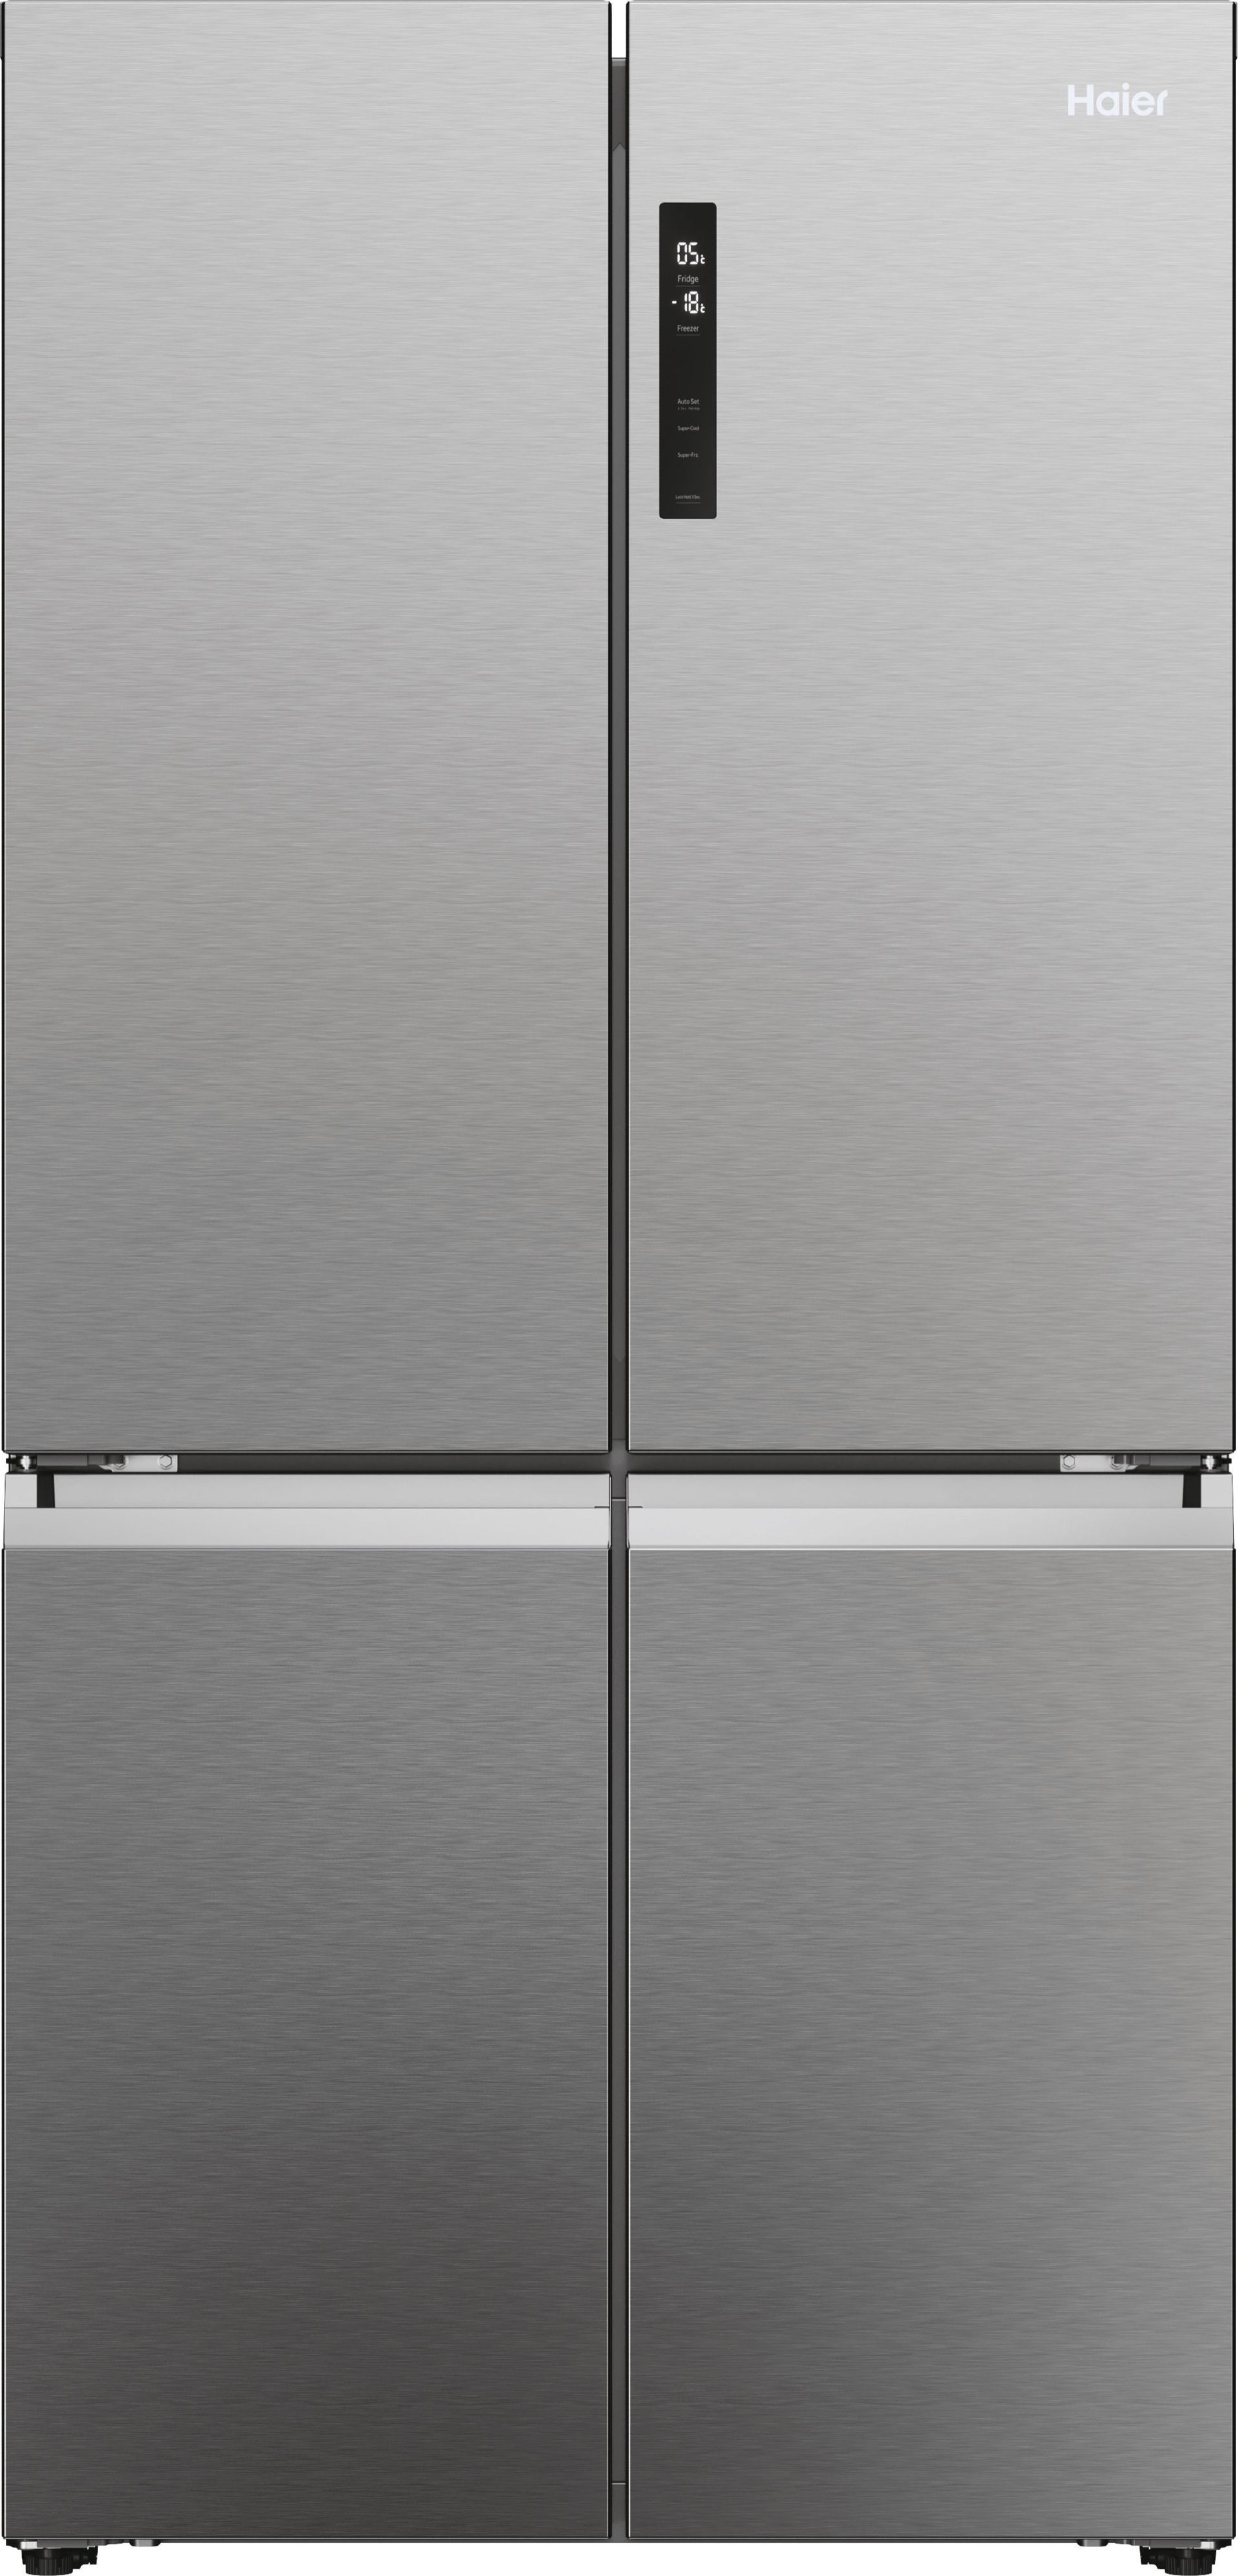 Haier Cube 90 Series 5 HCR5919ENMP Total No Frost American Fridge Freezer - Stainless Steel - E Rated, Stainless Steel